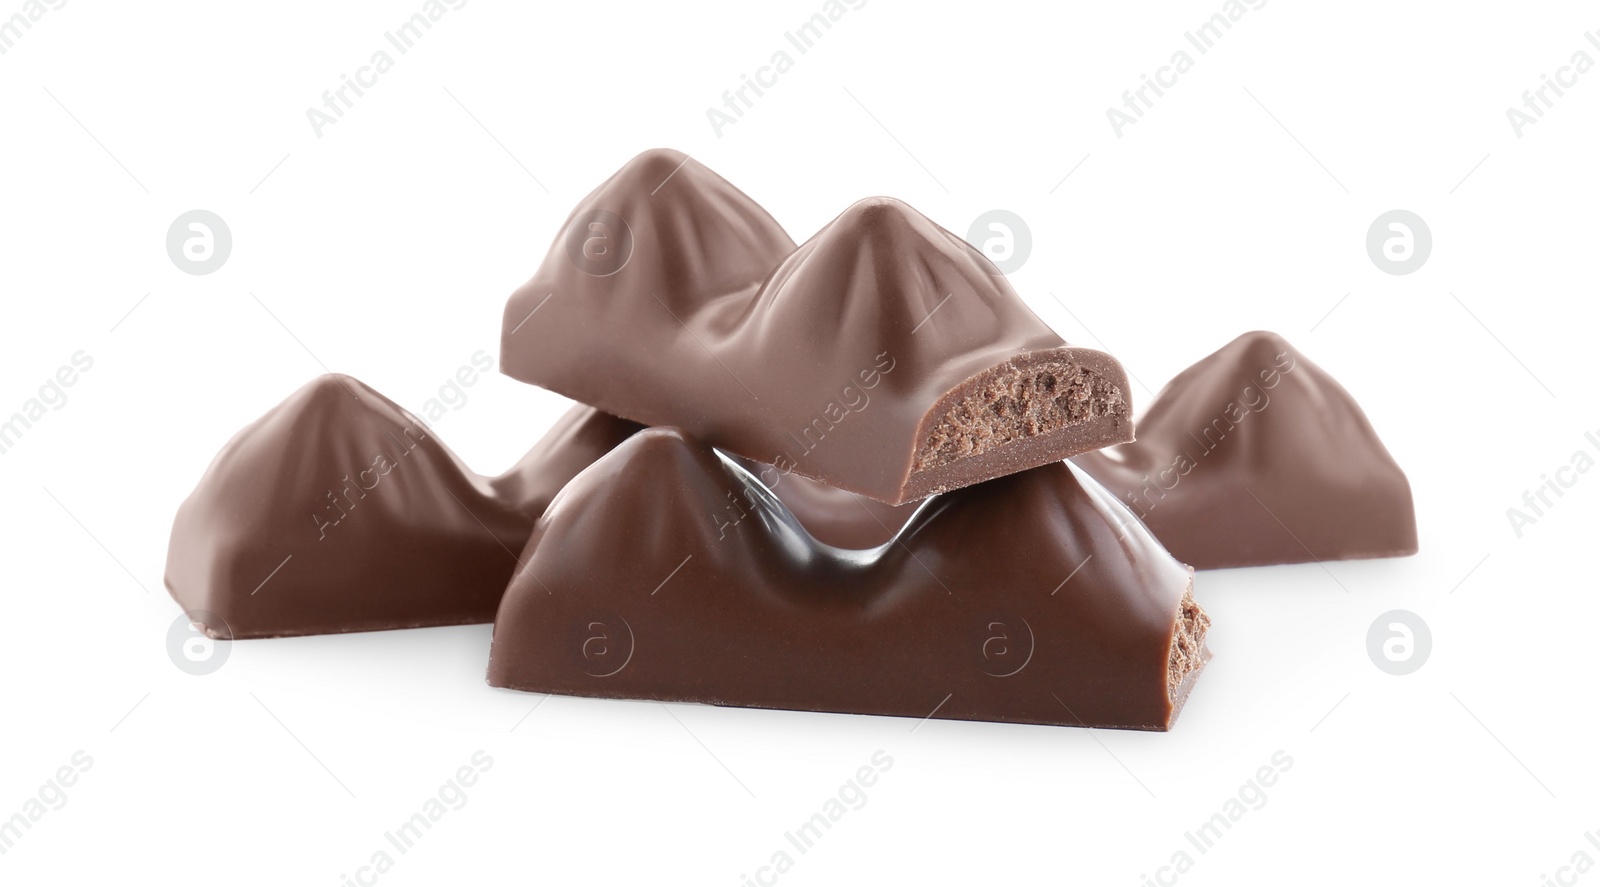 Photo of Pieces of tasty chocolate bars on white background